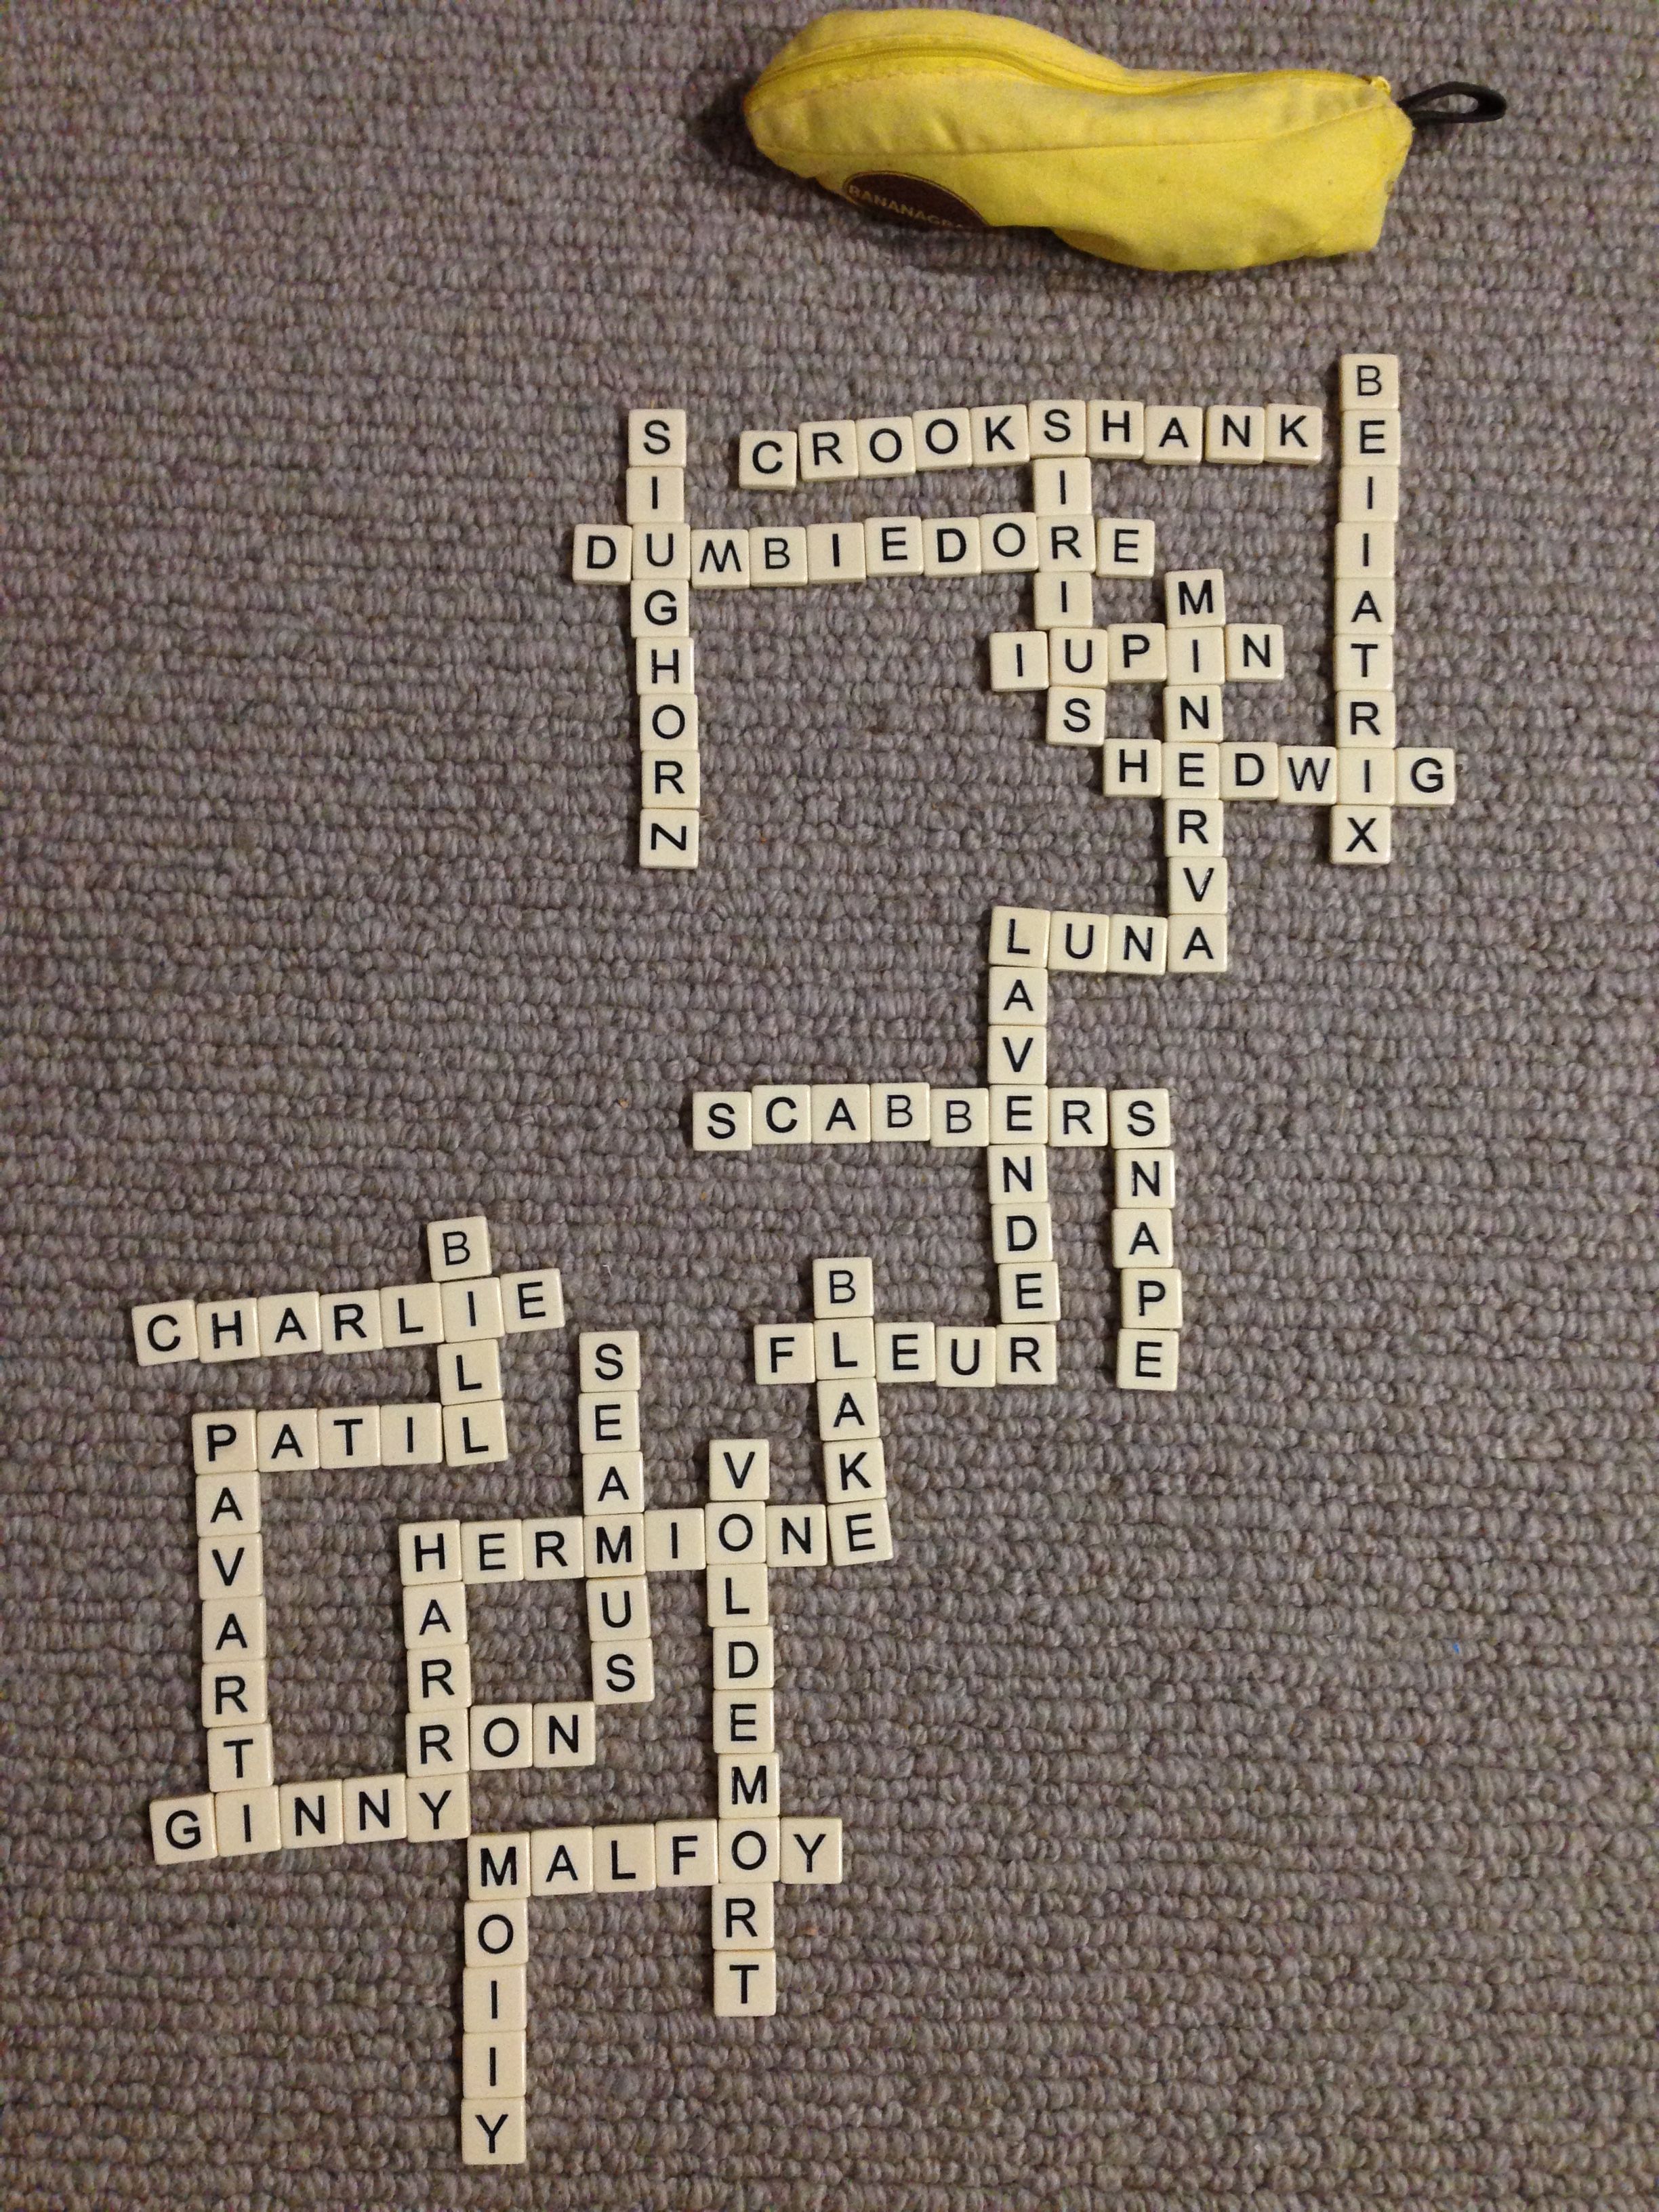 Harry Potter Bananagrams They Used An I Instead Of L Towards